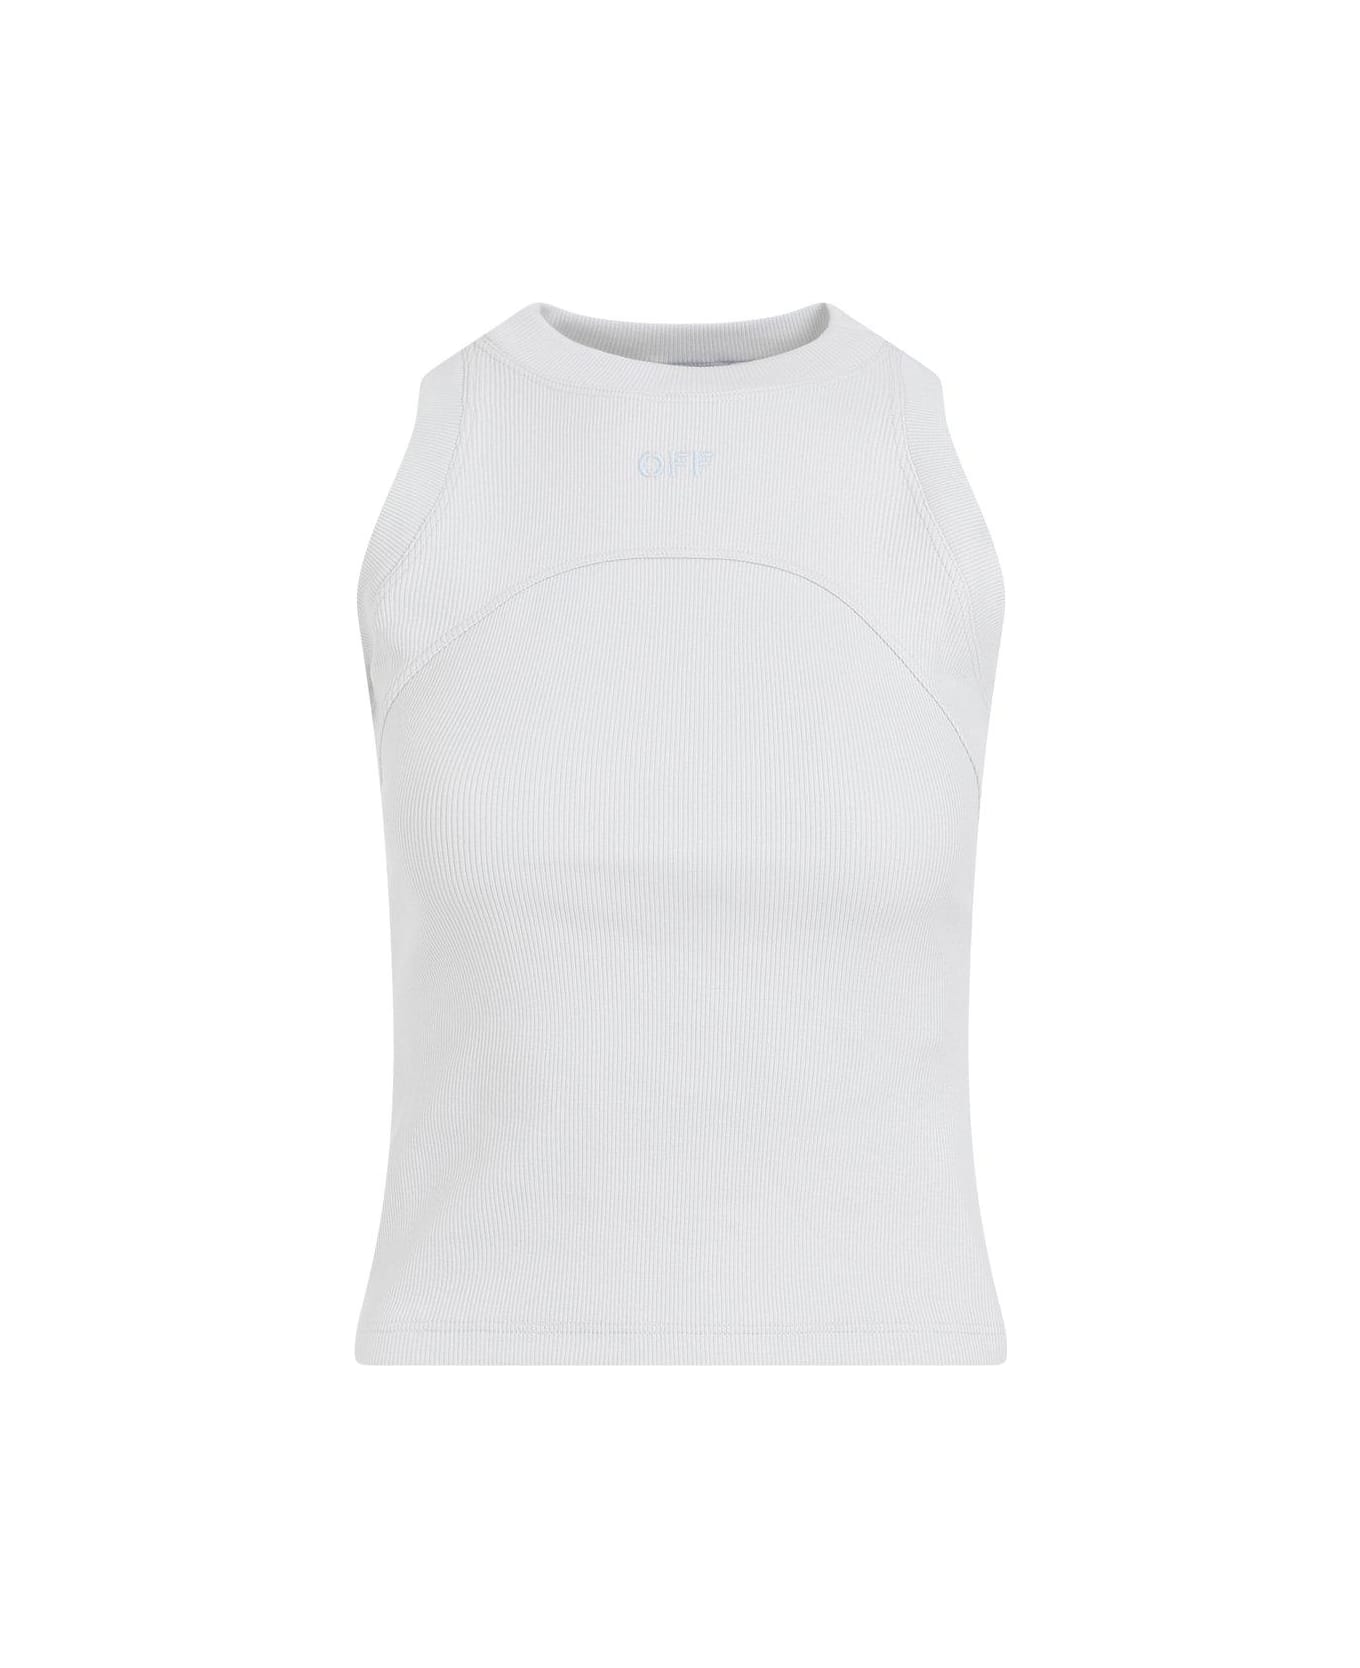 Off-White Logo Embroidered Sleeveless Top - ARTIC ICE ARTIC ICE